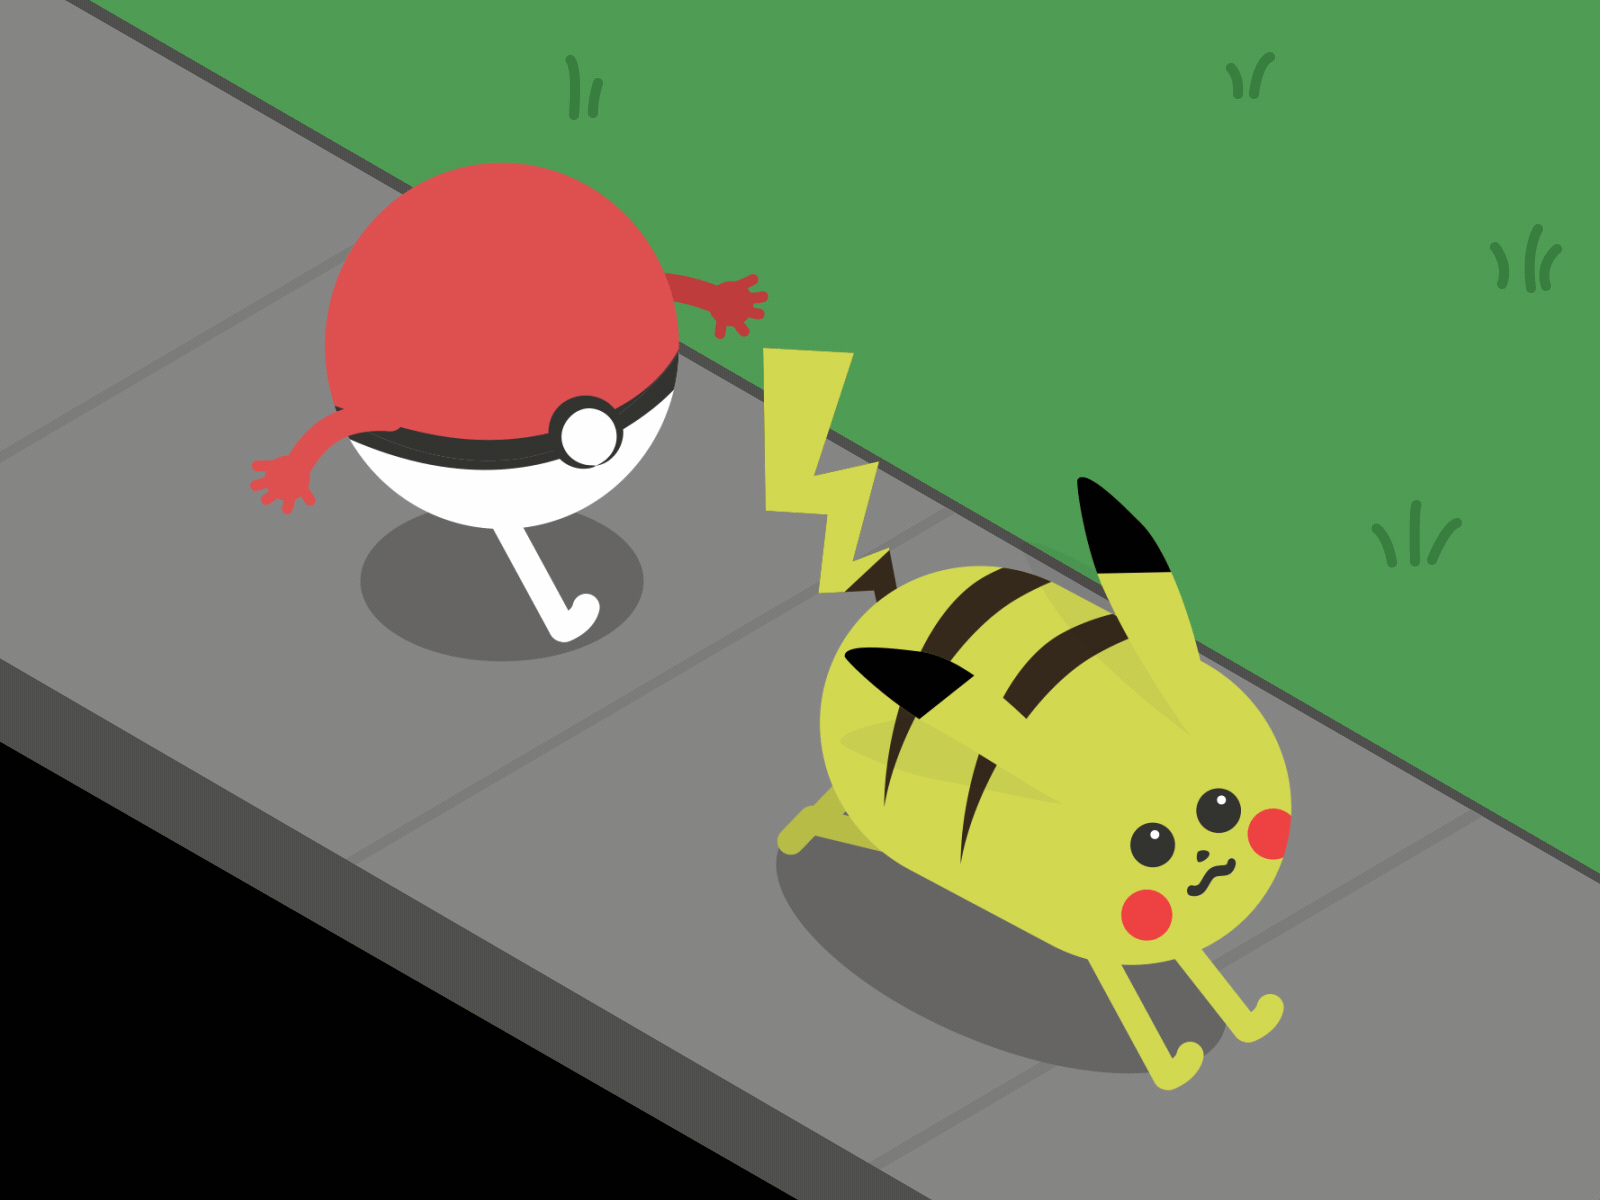 Pikachu Chase by Armand Piecuch on Dribbble